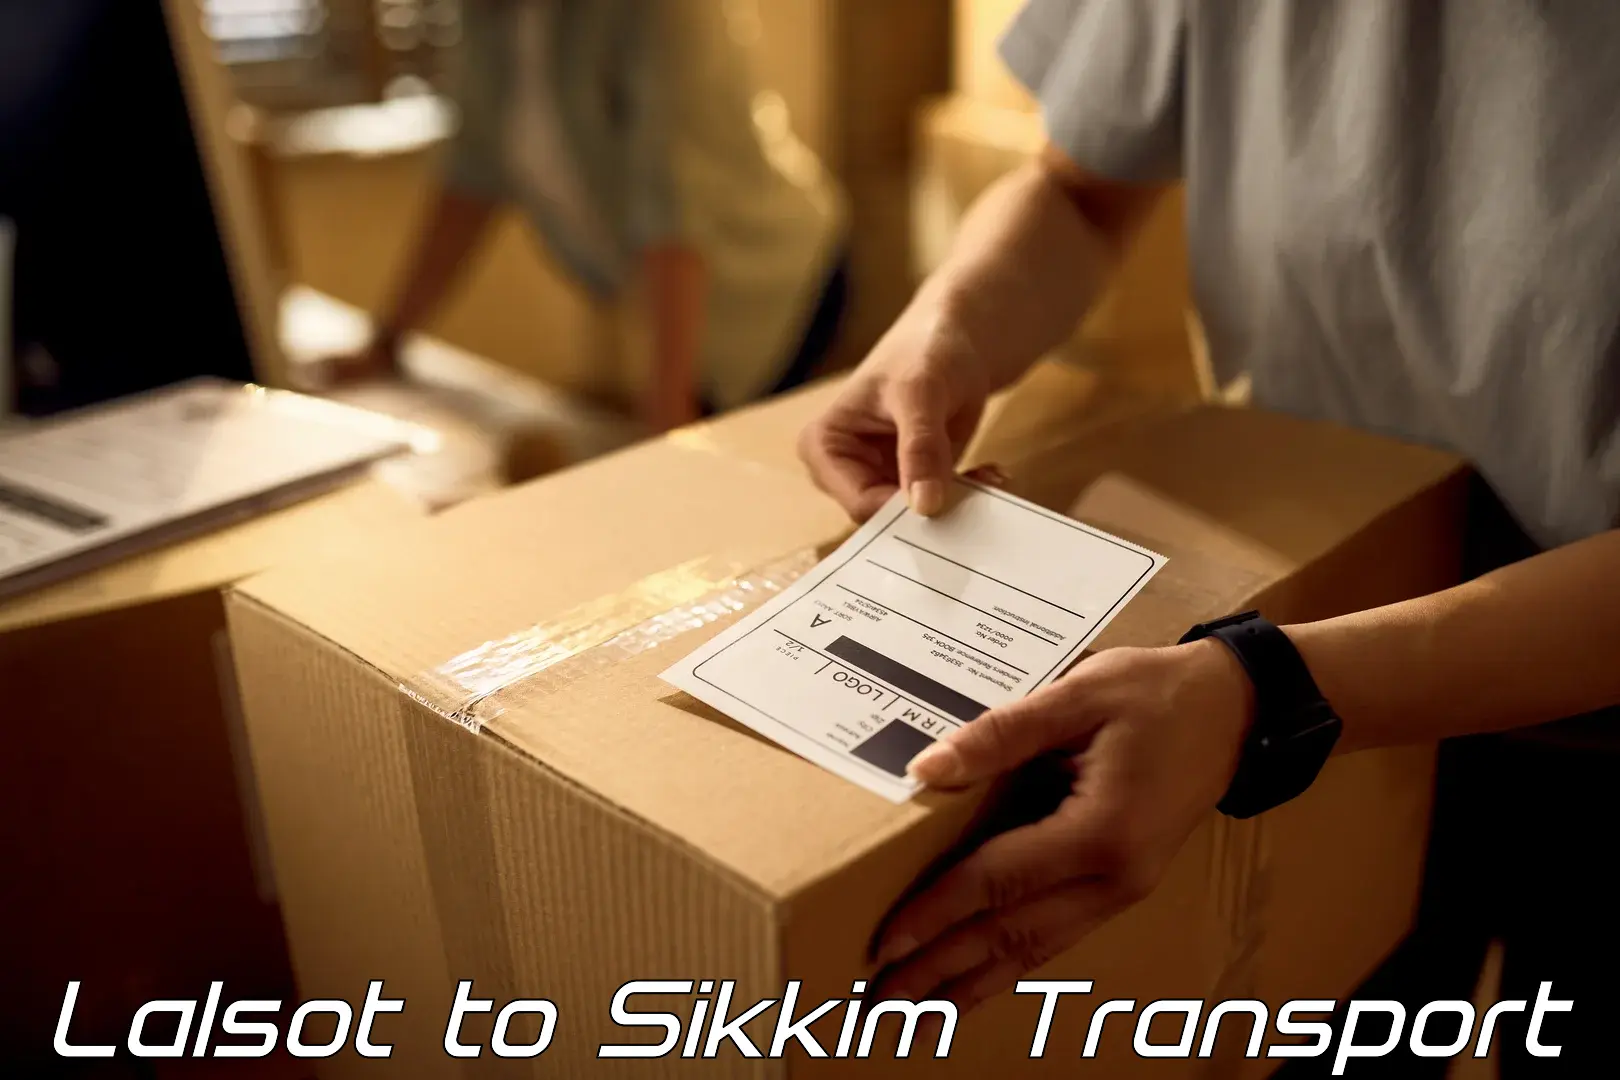 All India transport service Lalsot to Sikkim